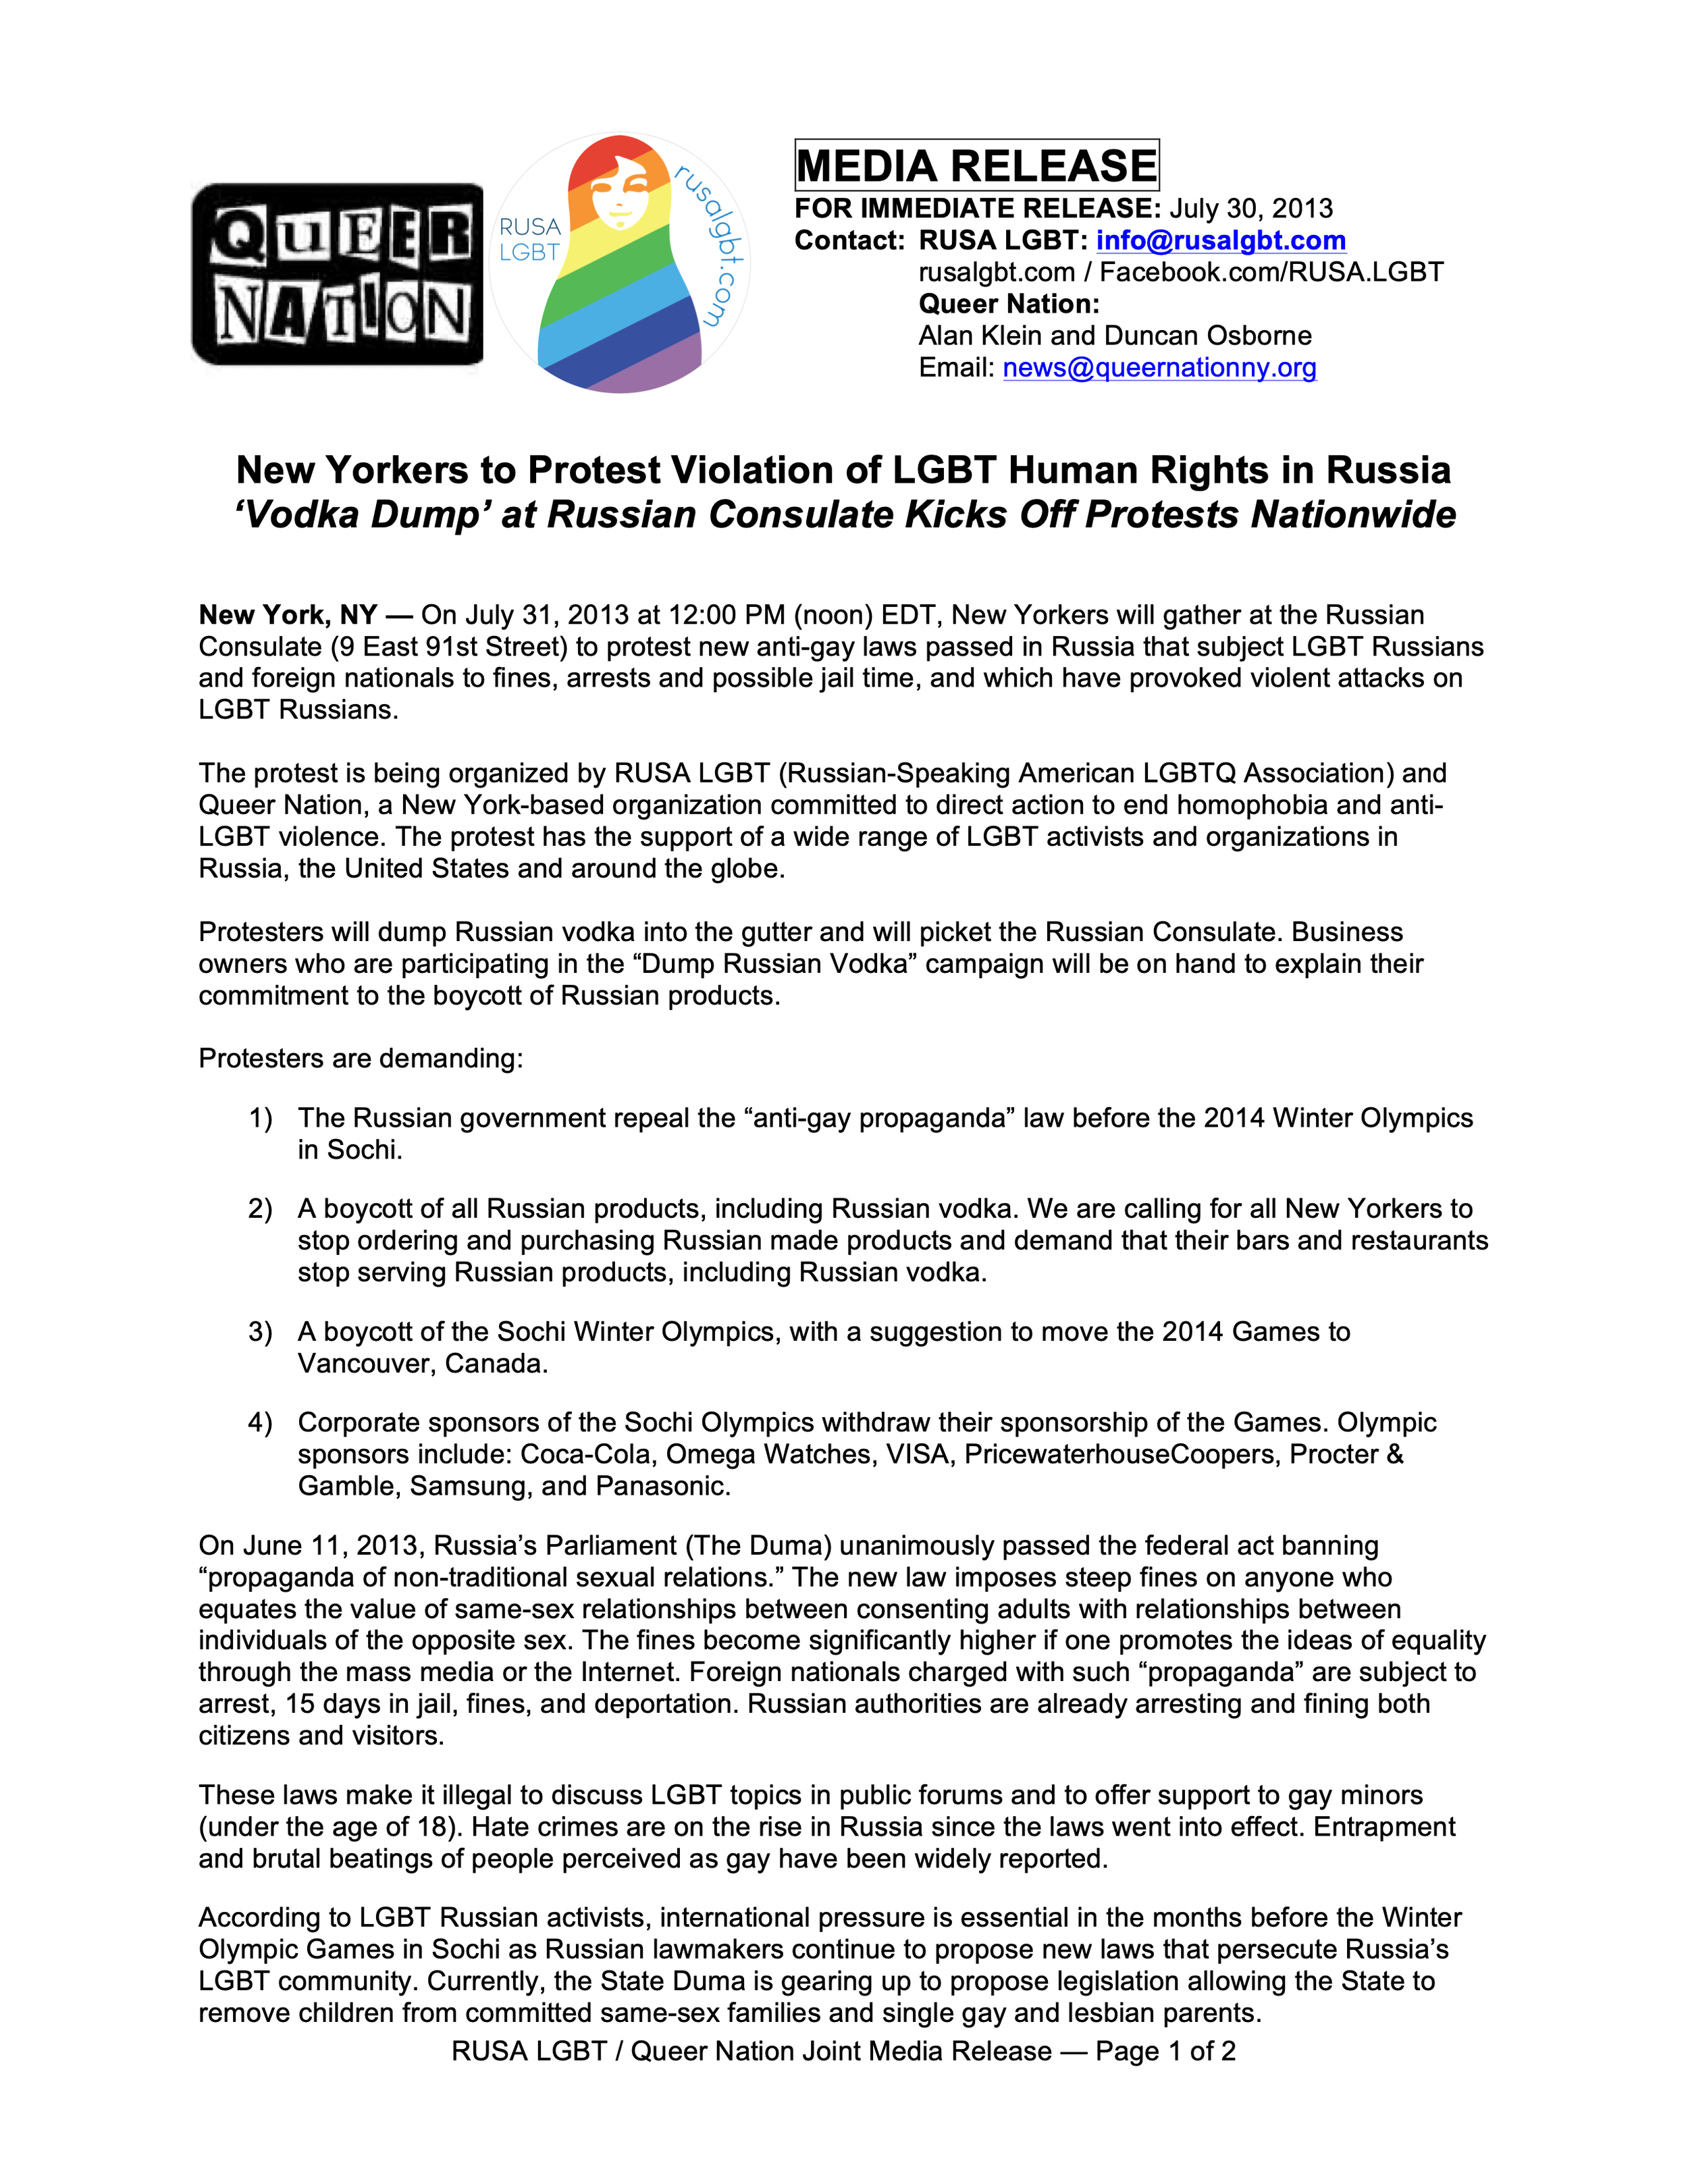 New Yorkers to Protest Violation of LGBT Human Rights in Russia ‘Vodka Dump’ at Russian Consulate Kicks Off Protests Nationwide, page 1